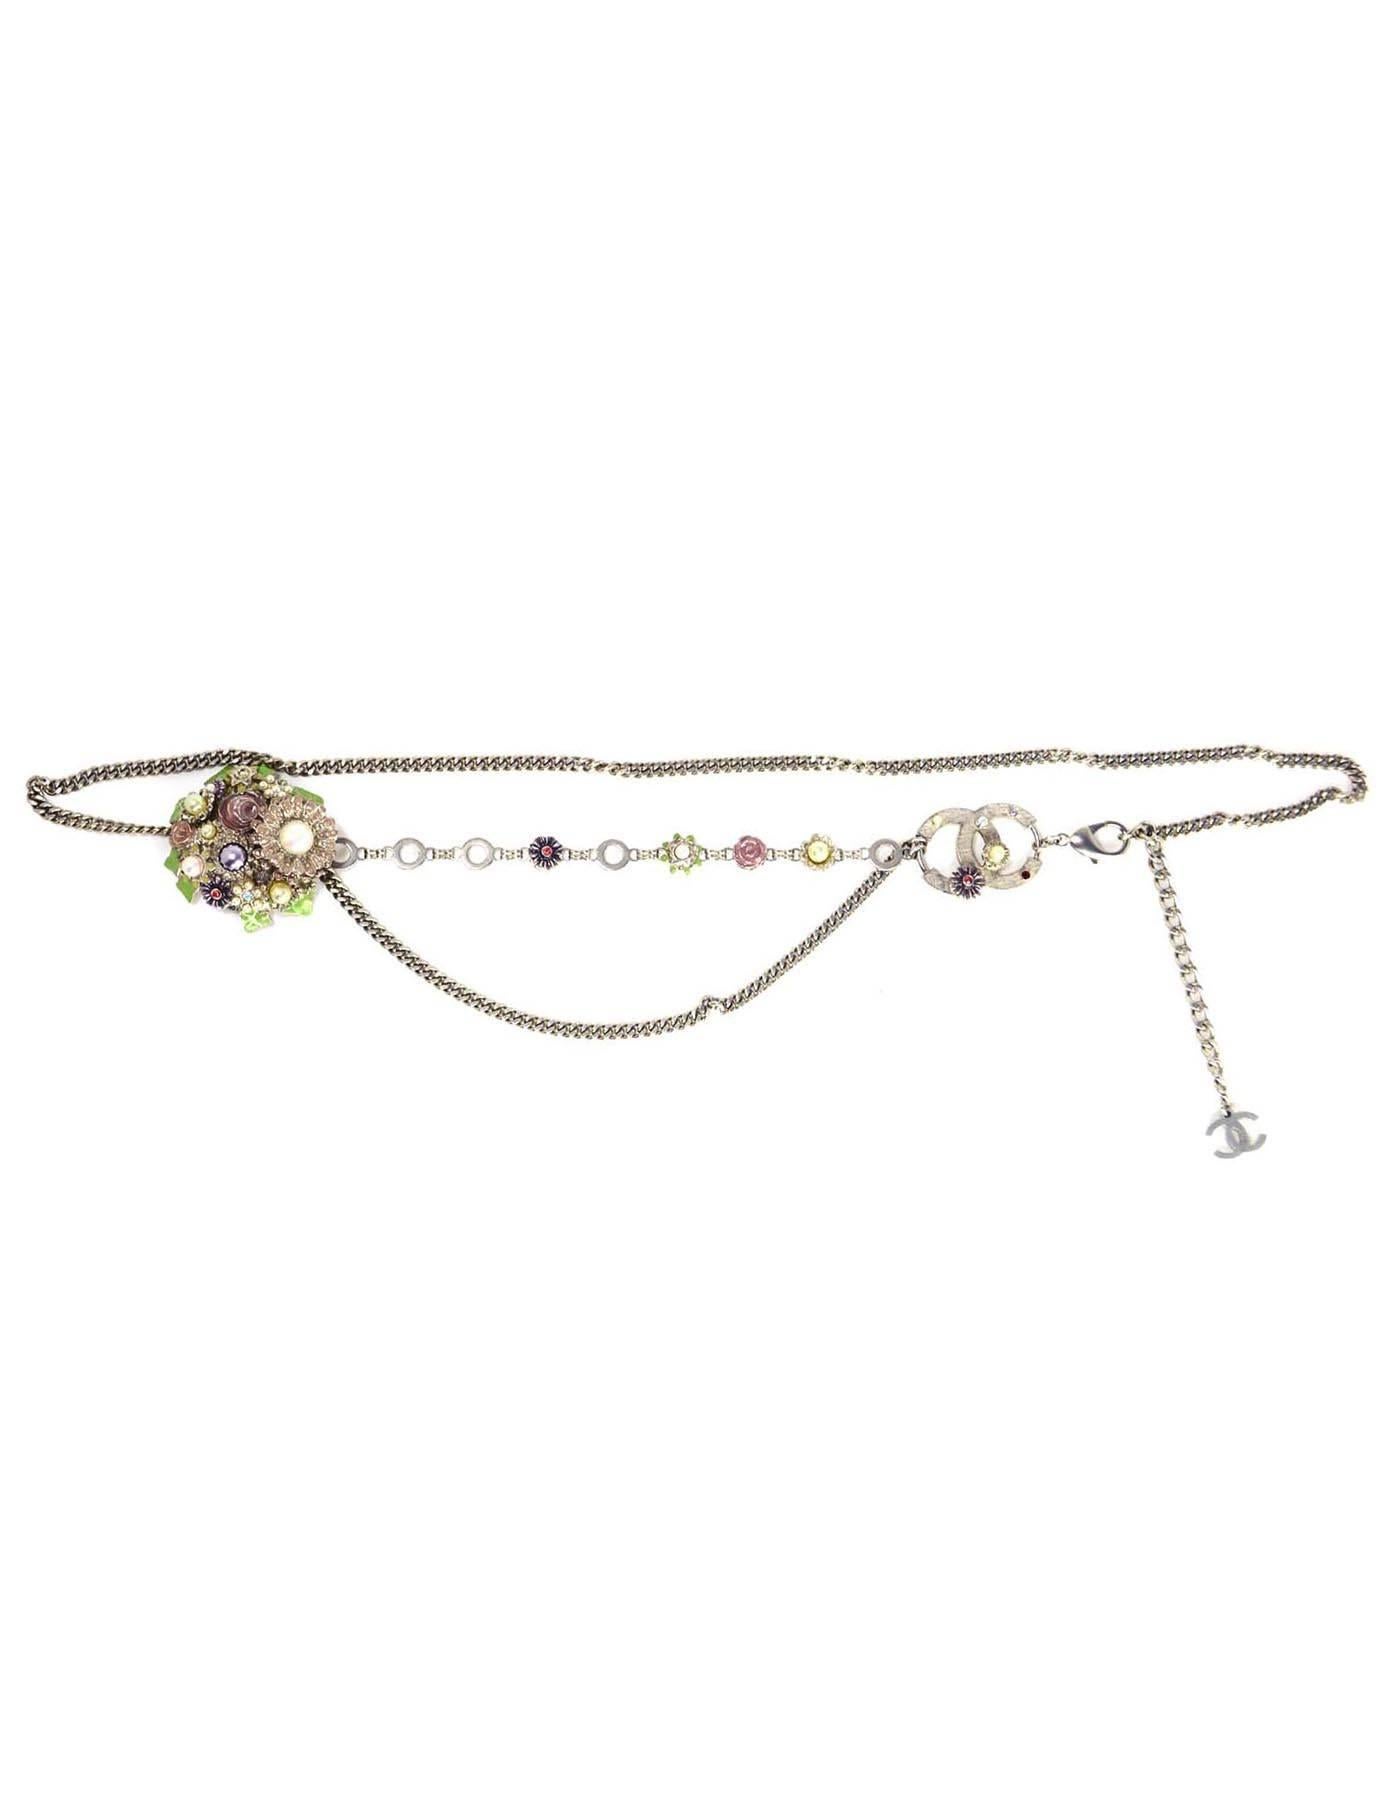 Chanel Silver Flower & CC Chain Link Belt
Features faux pearls and rhinestone filled flower pendants and one hanging chain link tier

Made in: France
Year of Production: 2005
Stamp: 05 CC P
Closure: Lobster claw clasp
Color: Silver, ivory, green